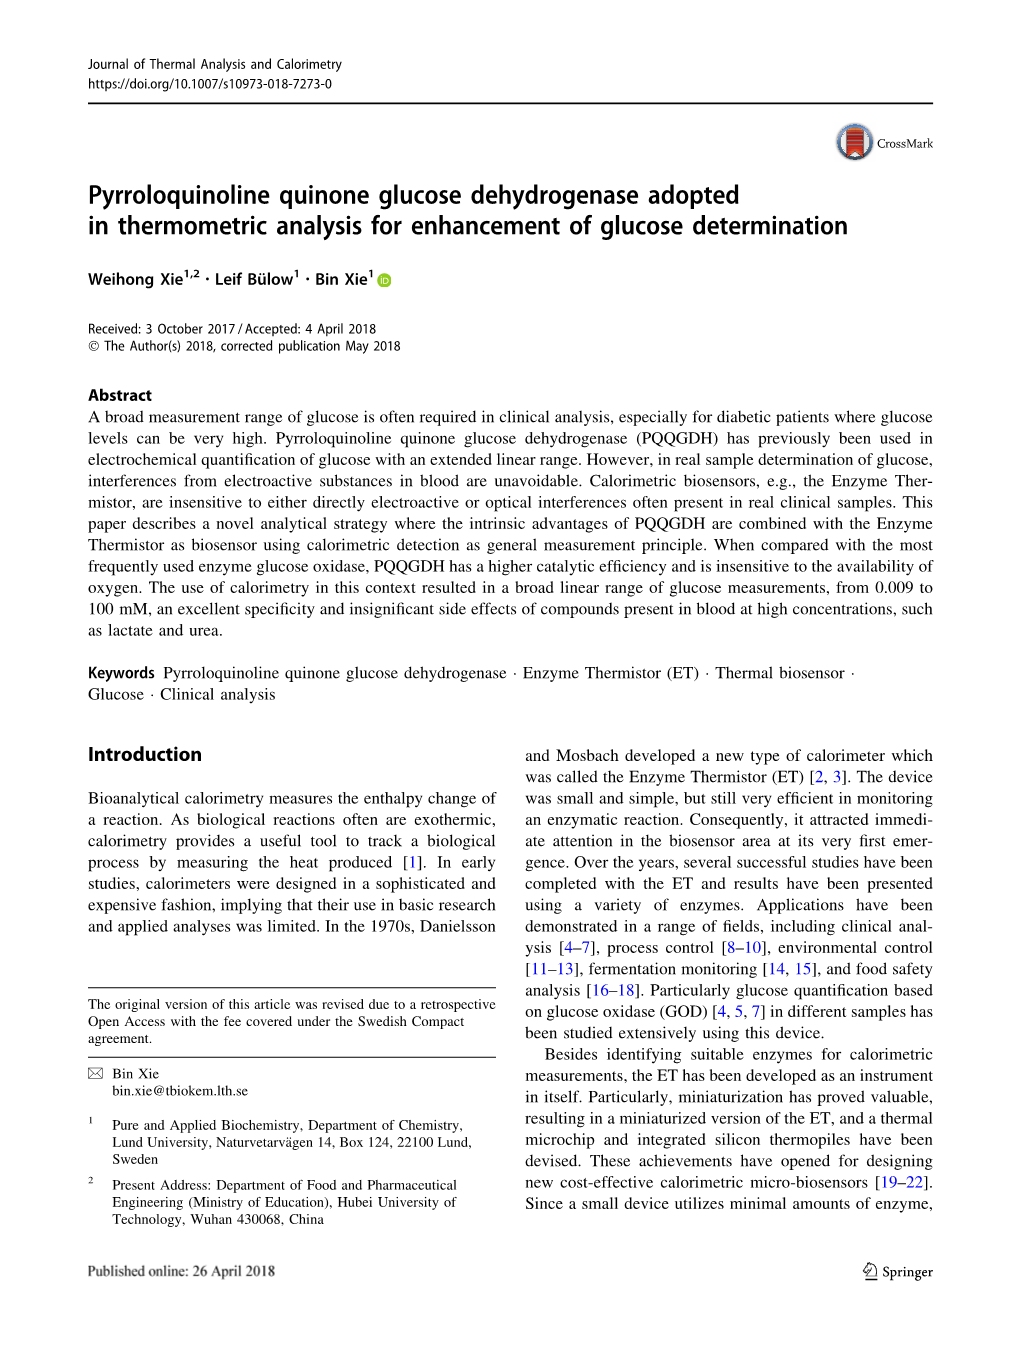 Pyrroloquinoline Quinone Glucose Dehydrogenase Adopted in Thermometric Analysis for Enhancement of Glucose Determination